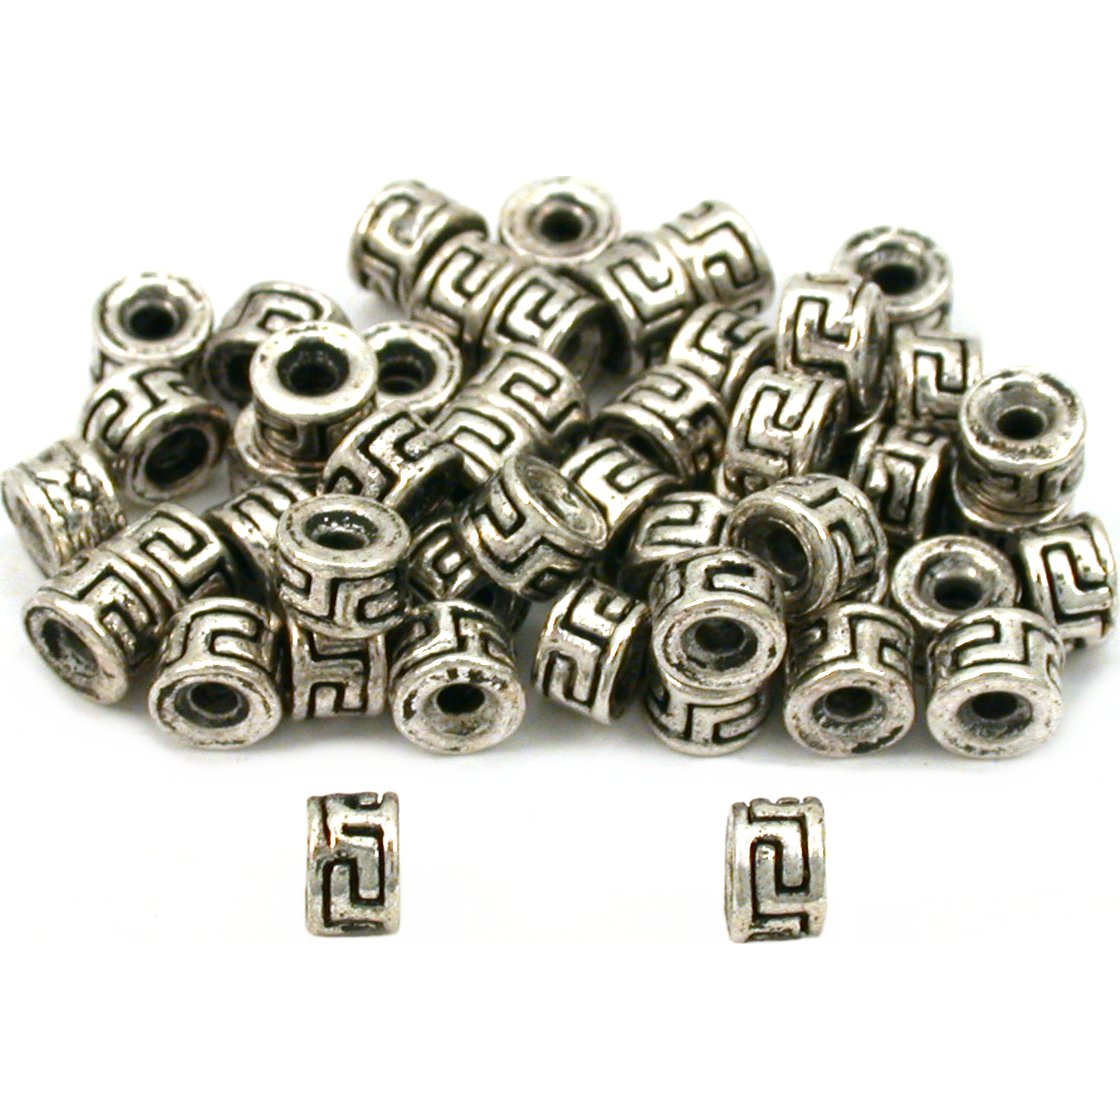 Bali Spacer Beads Antique Silver Plated 5mm 50Pcs Approx.